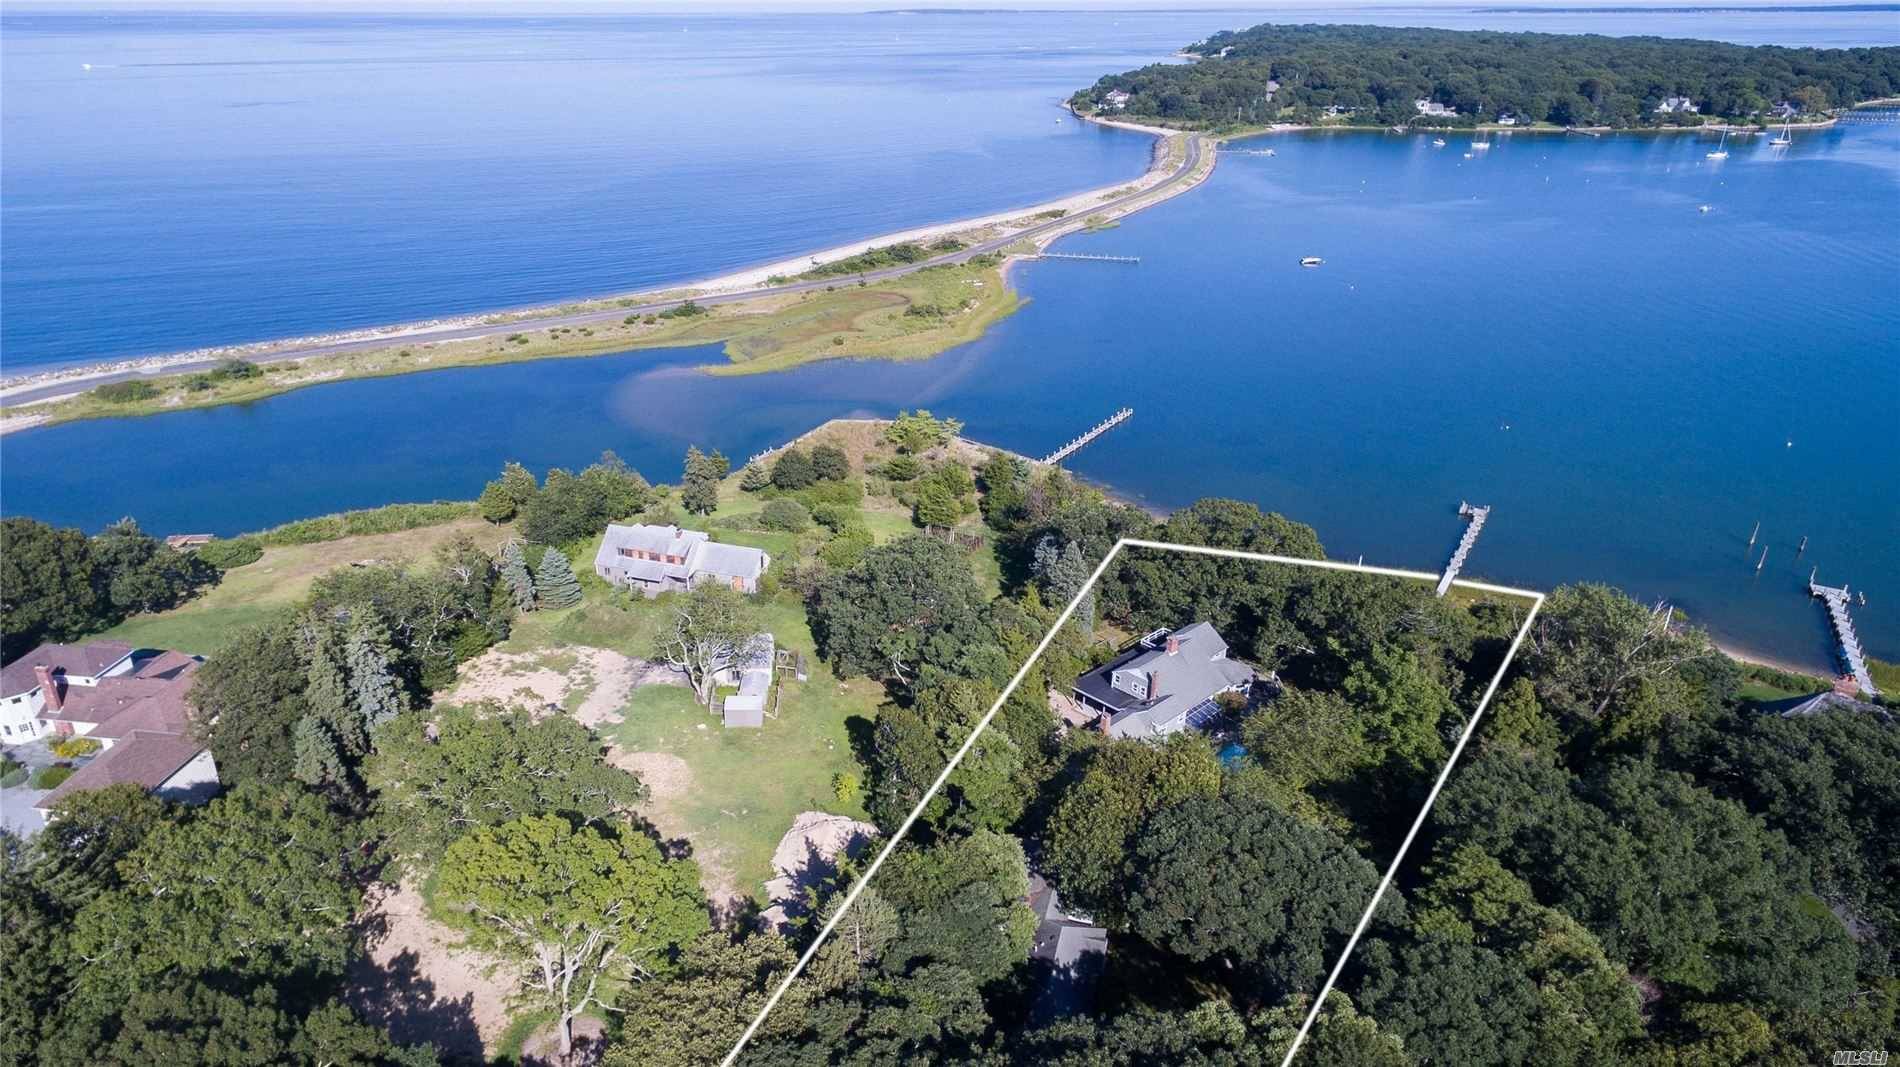 Stunning 2. 49 acre waterfront on Little Ram Island with main house, in ground waterside pool, 109' dock amp ; guest accessory living quarters w 2 car garage.